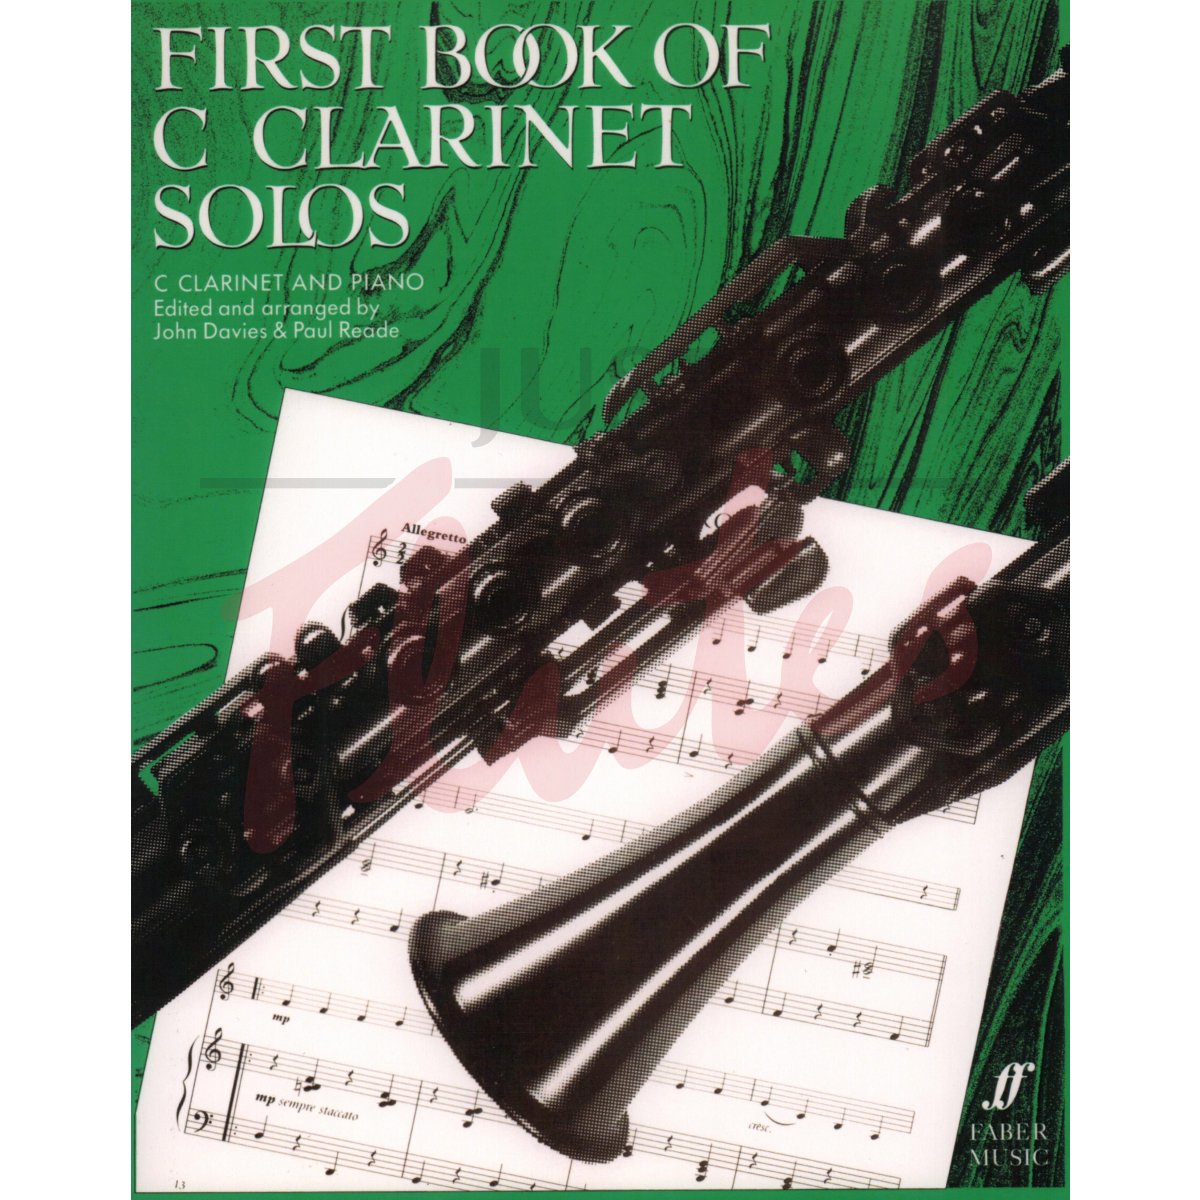 First Book of C Clarinet Solos